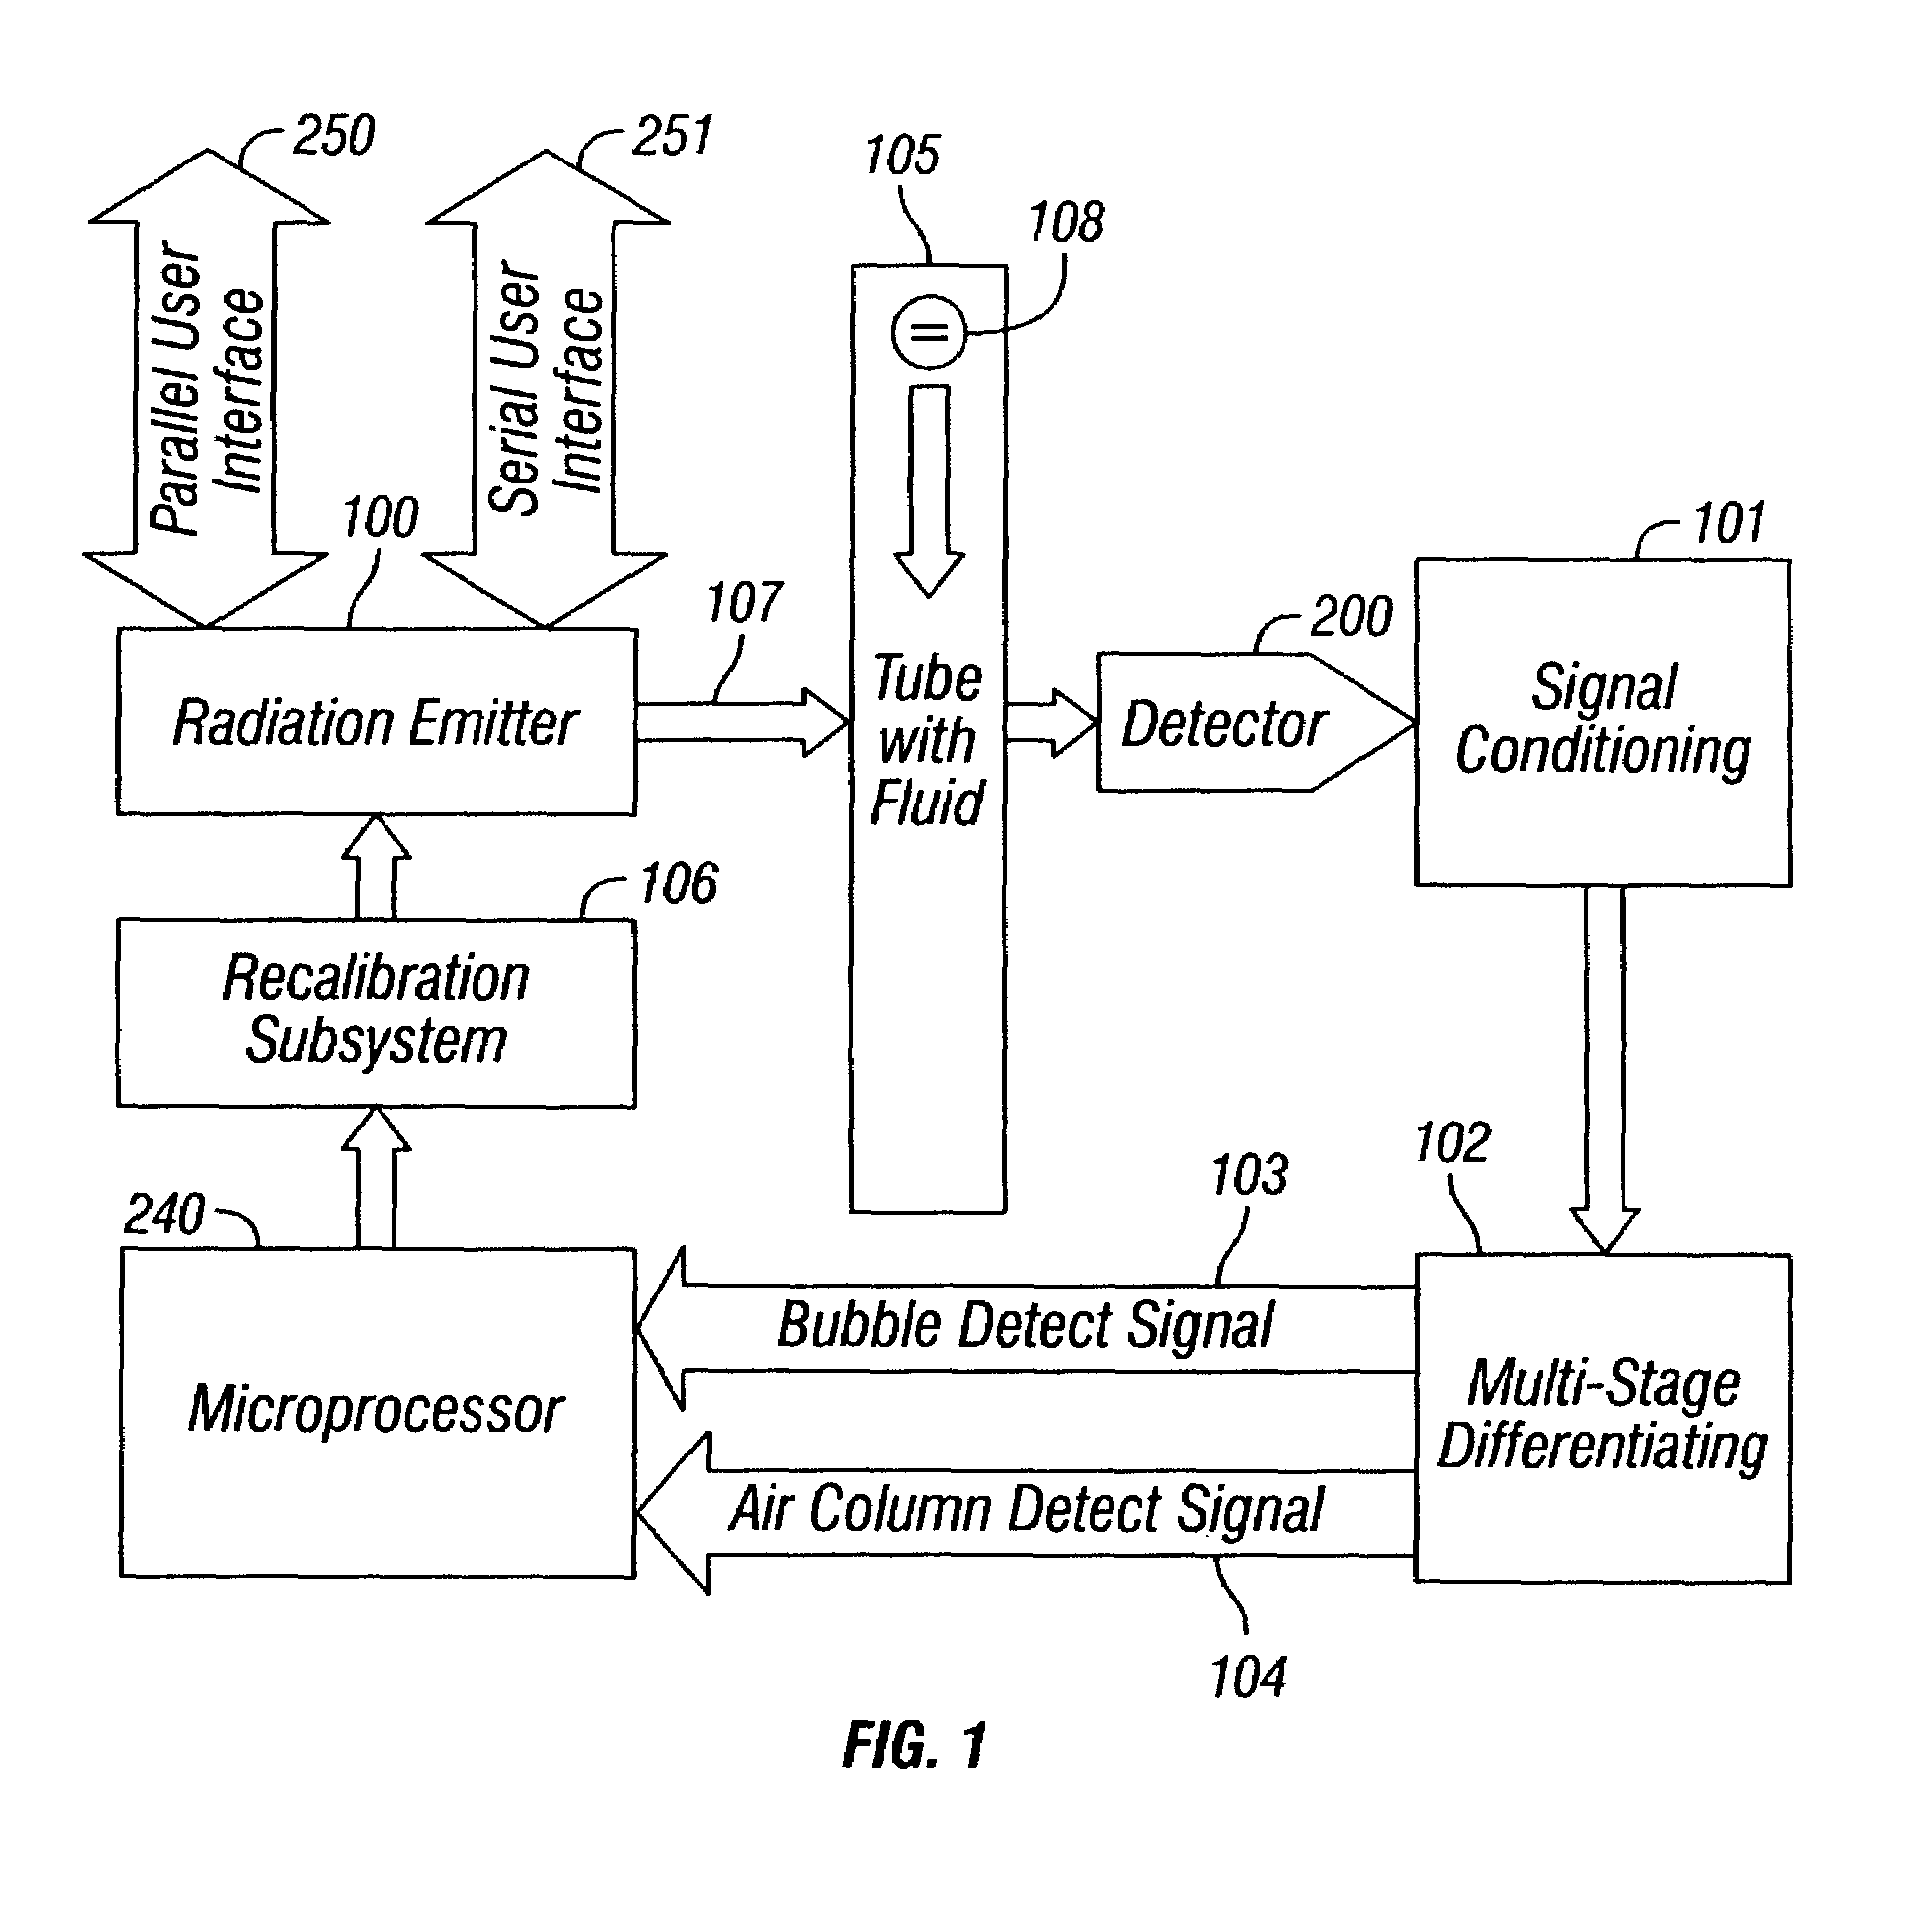 Systems and methods for detection and measurement of elements in a medium